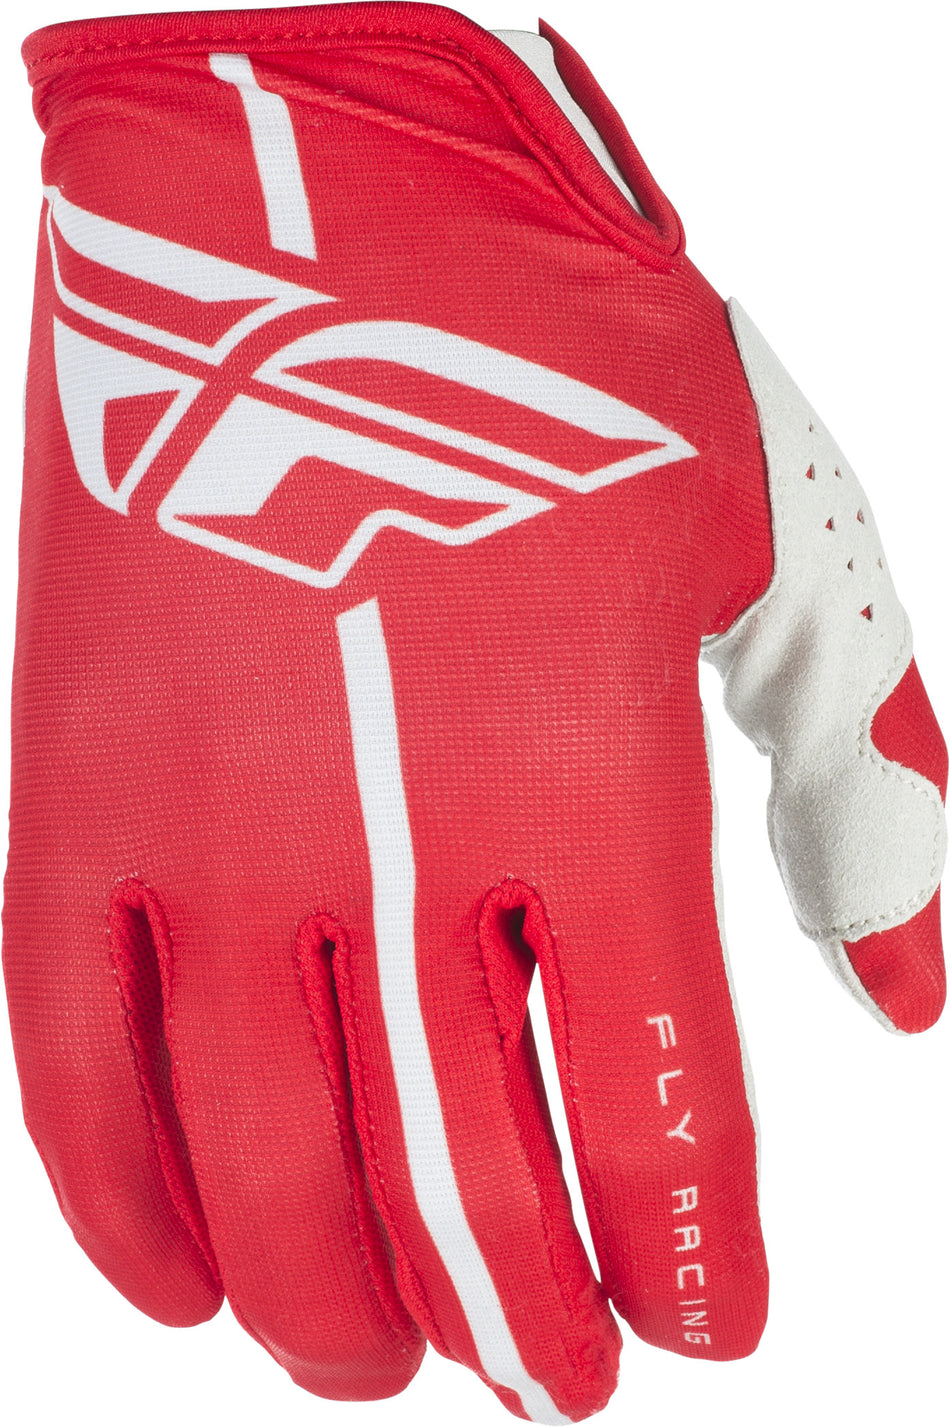 FLY RACING Lite Gloves Red/Grey Sz 7 371-01207